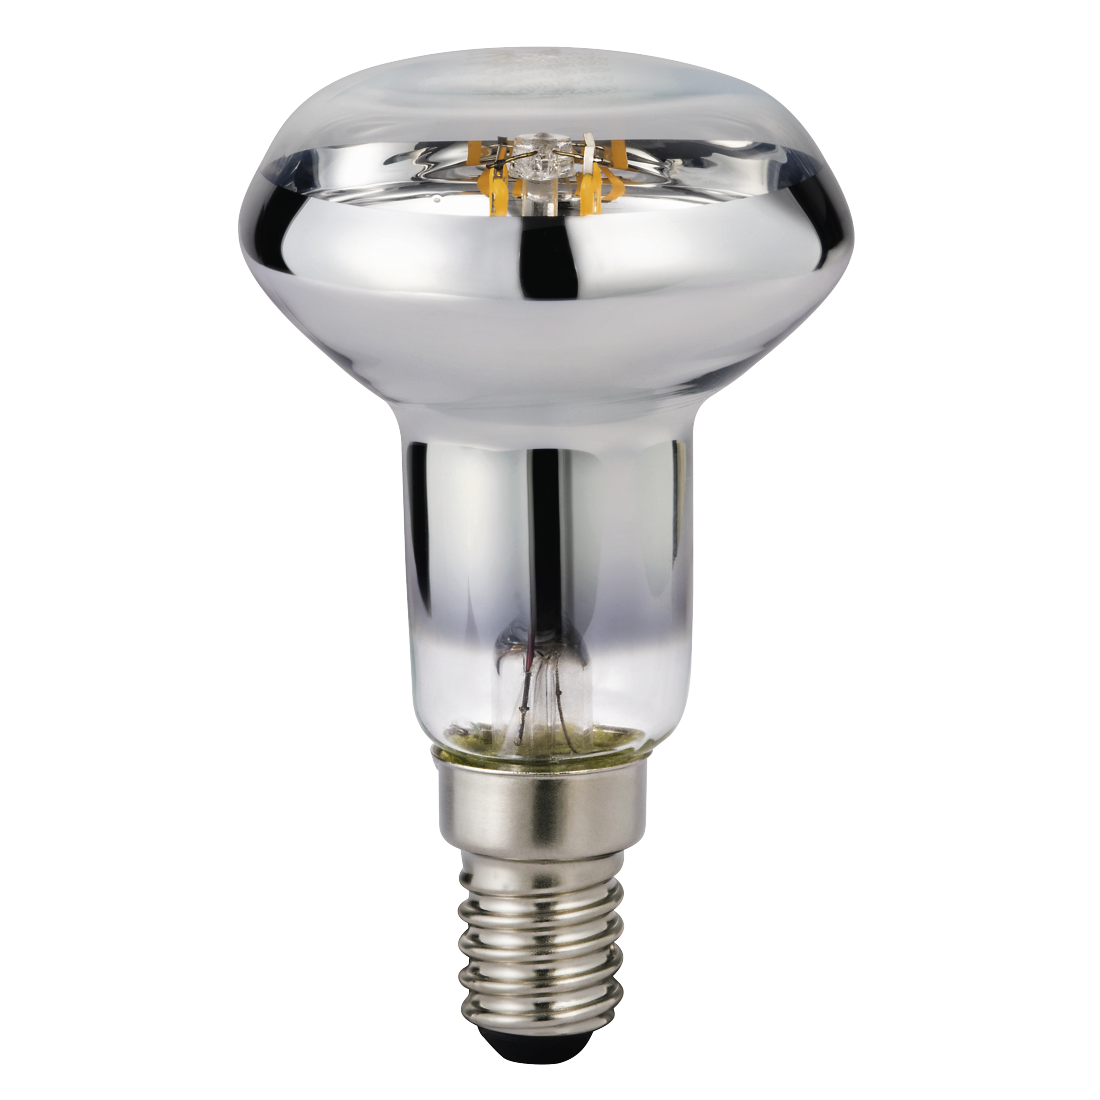 abx High-Res Image - Xavax, LED Filament, E14, 320 lm Replaces 29 W, Reflector Bulb R50, warm white